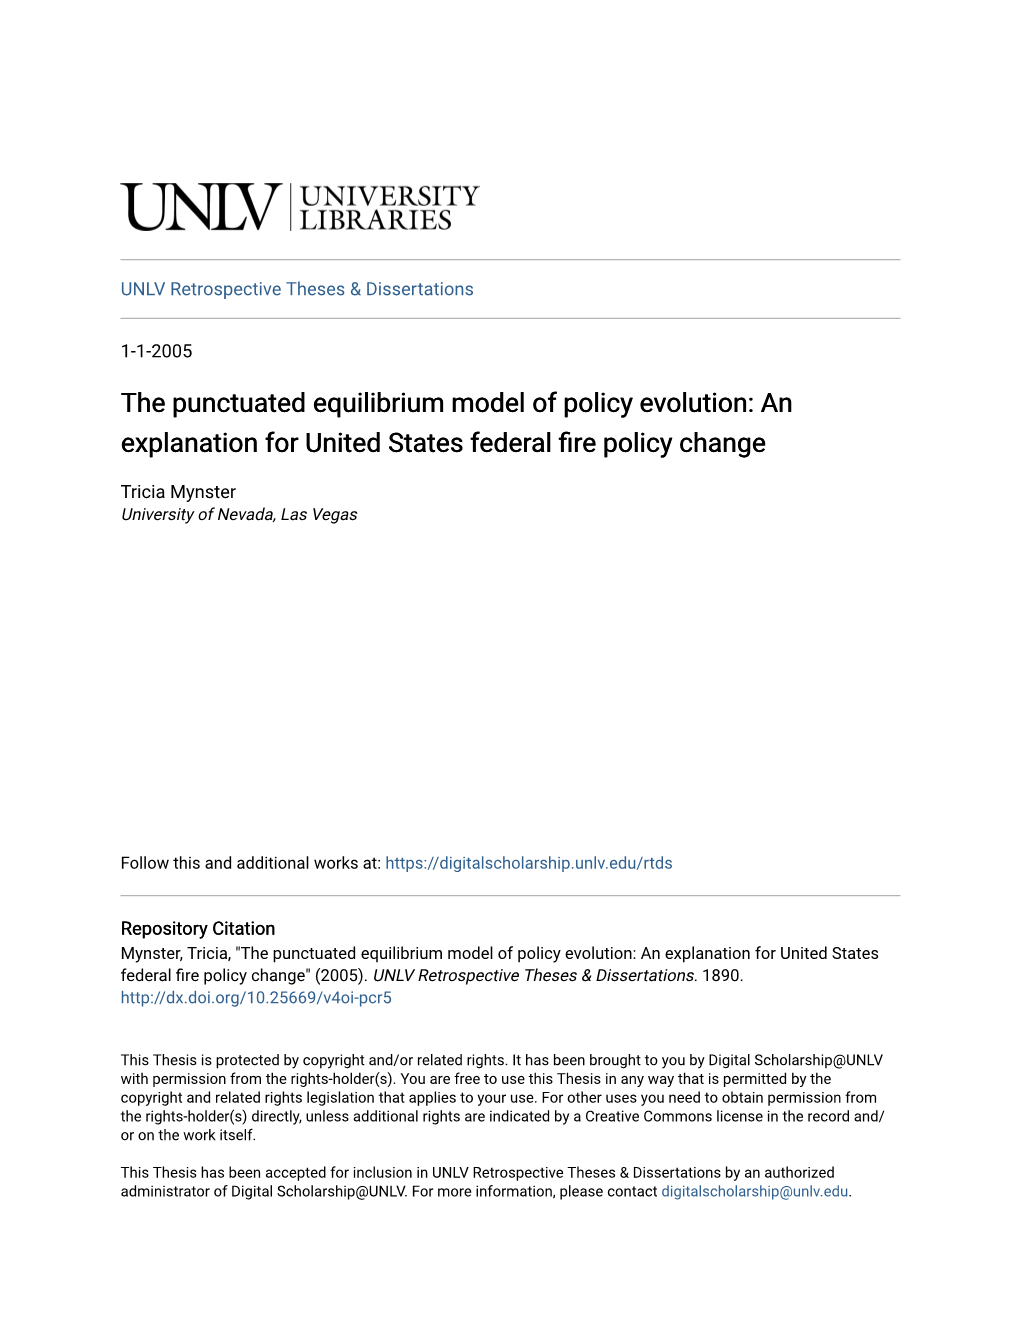 The Punctuated Equilibrium Model of Policy Evolution: an Explanation for United States Federal Fire Policy Change